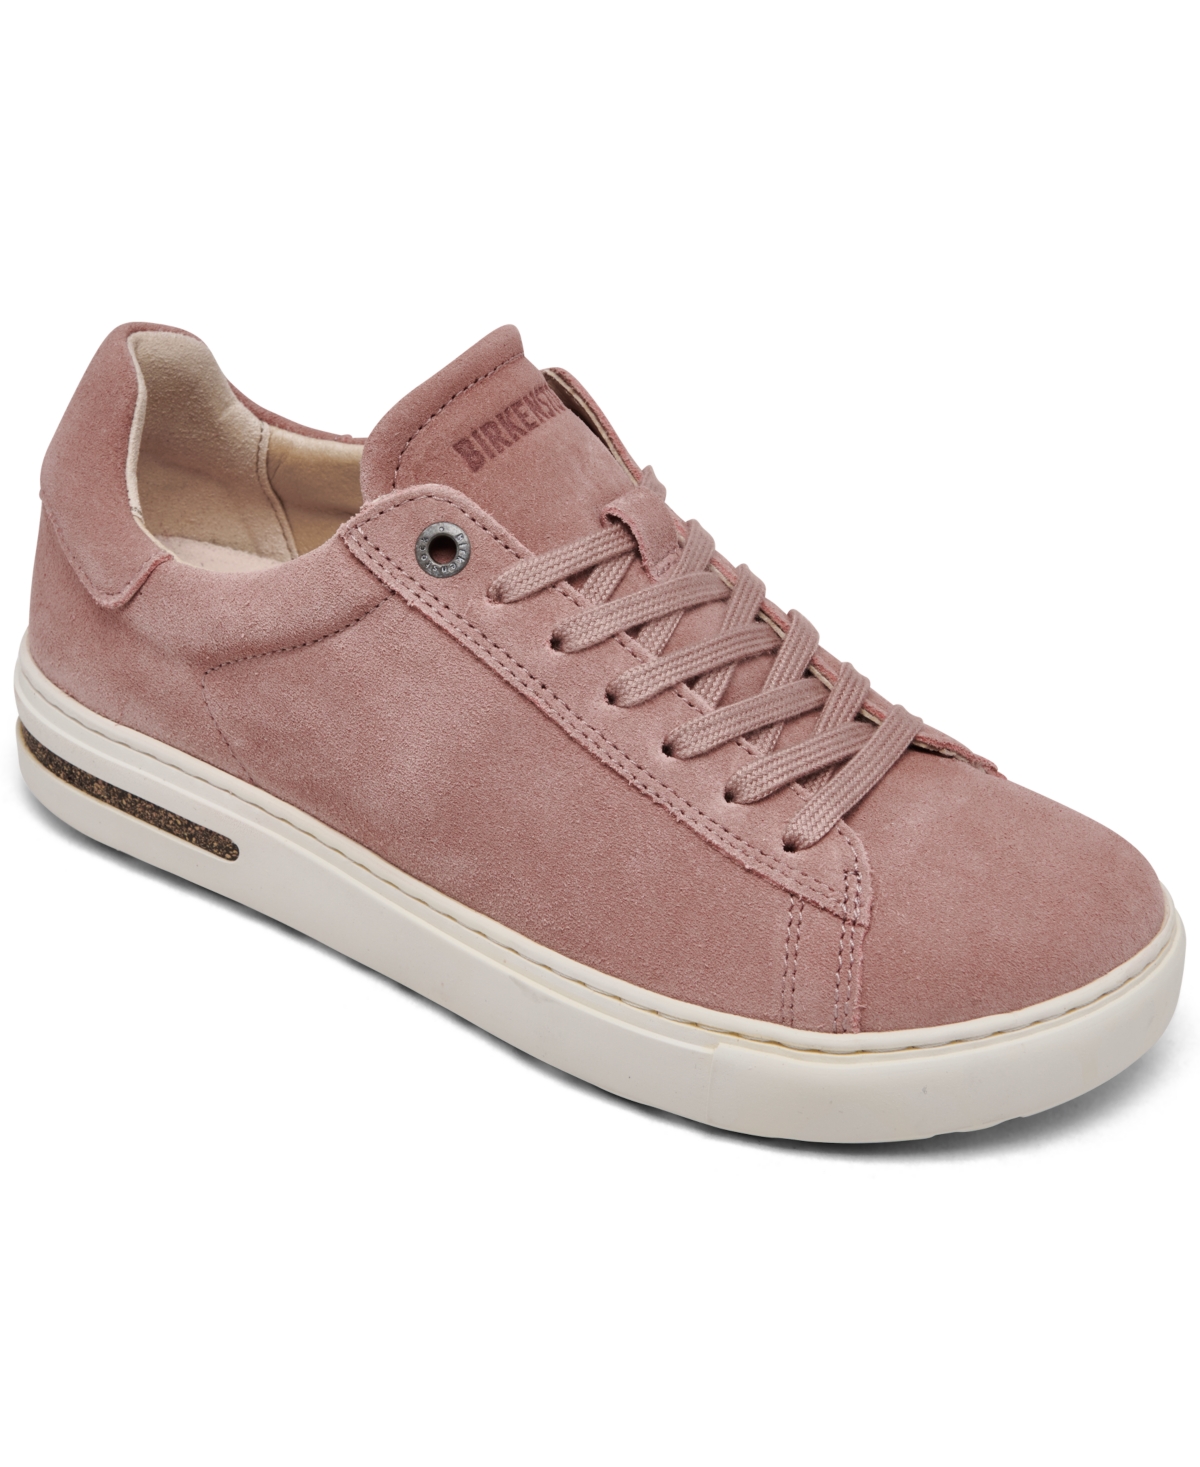 Shop Birkenstock Women's Bend Low Suede Leather Casual Sneakers From Finish Line In Pink Clay